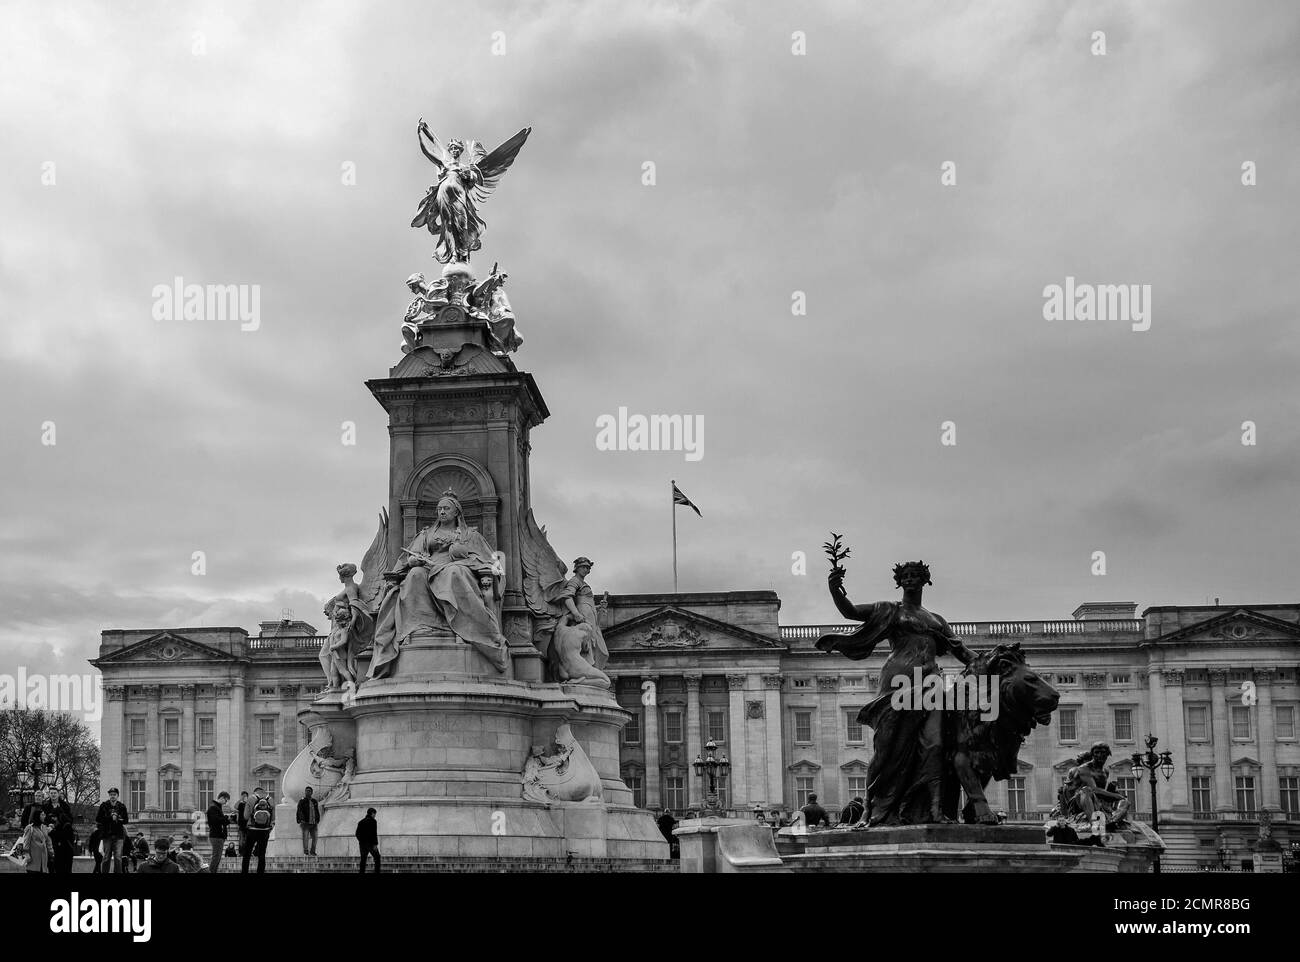 Buckingham Palace, London, UK - 2018.  The Queen Victoria Monument outside Buckingham Palace commemorating the reign of Queen Victoria. Stock Photo